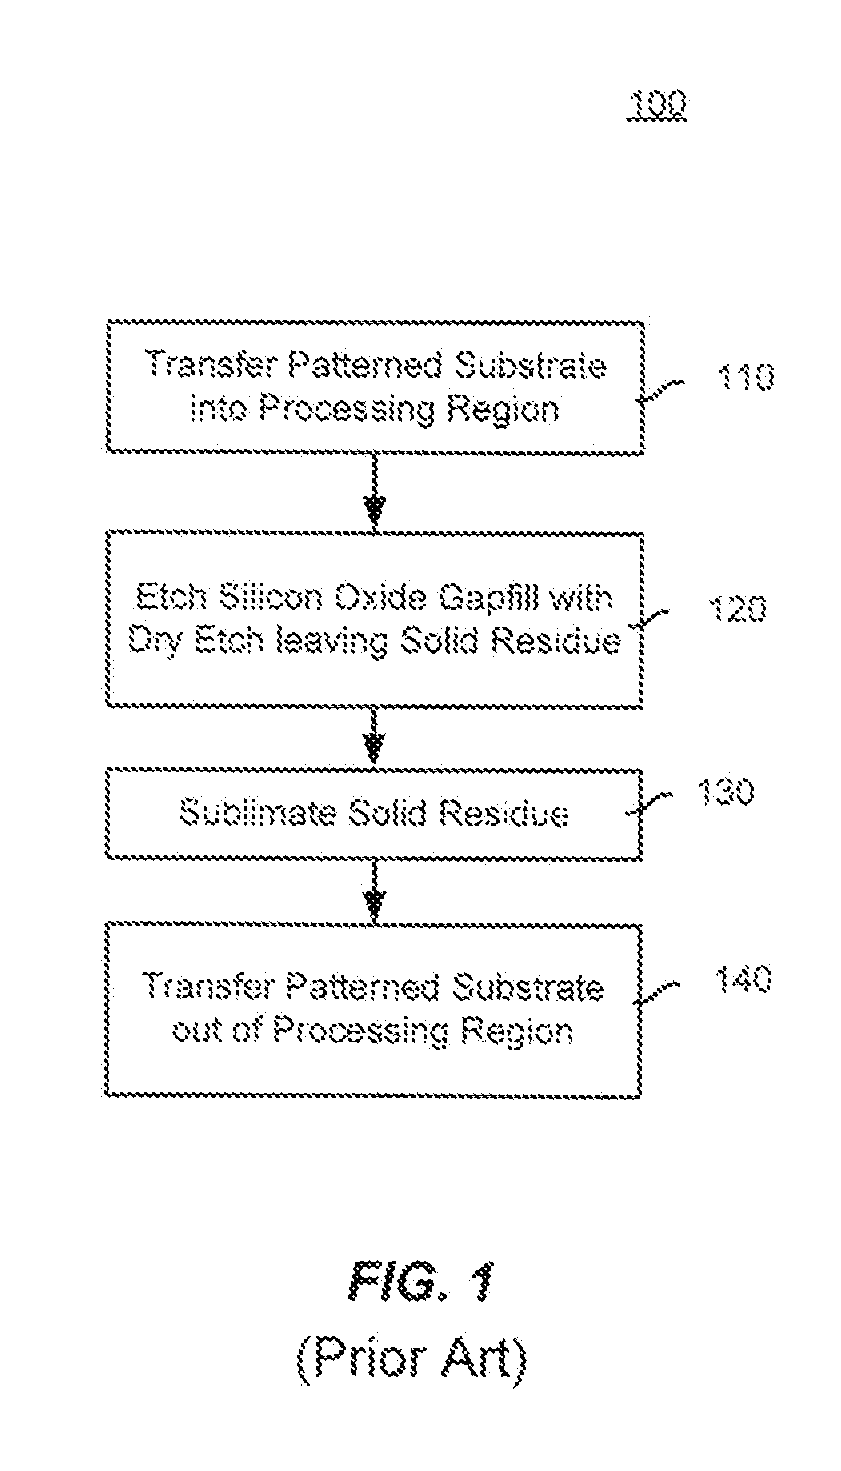 Semiconductor chamber apparatus for dielectric processing